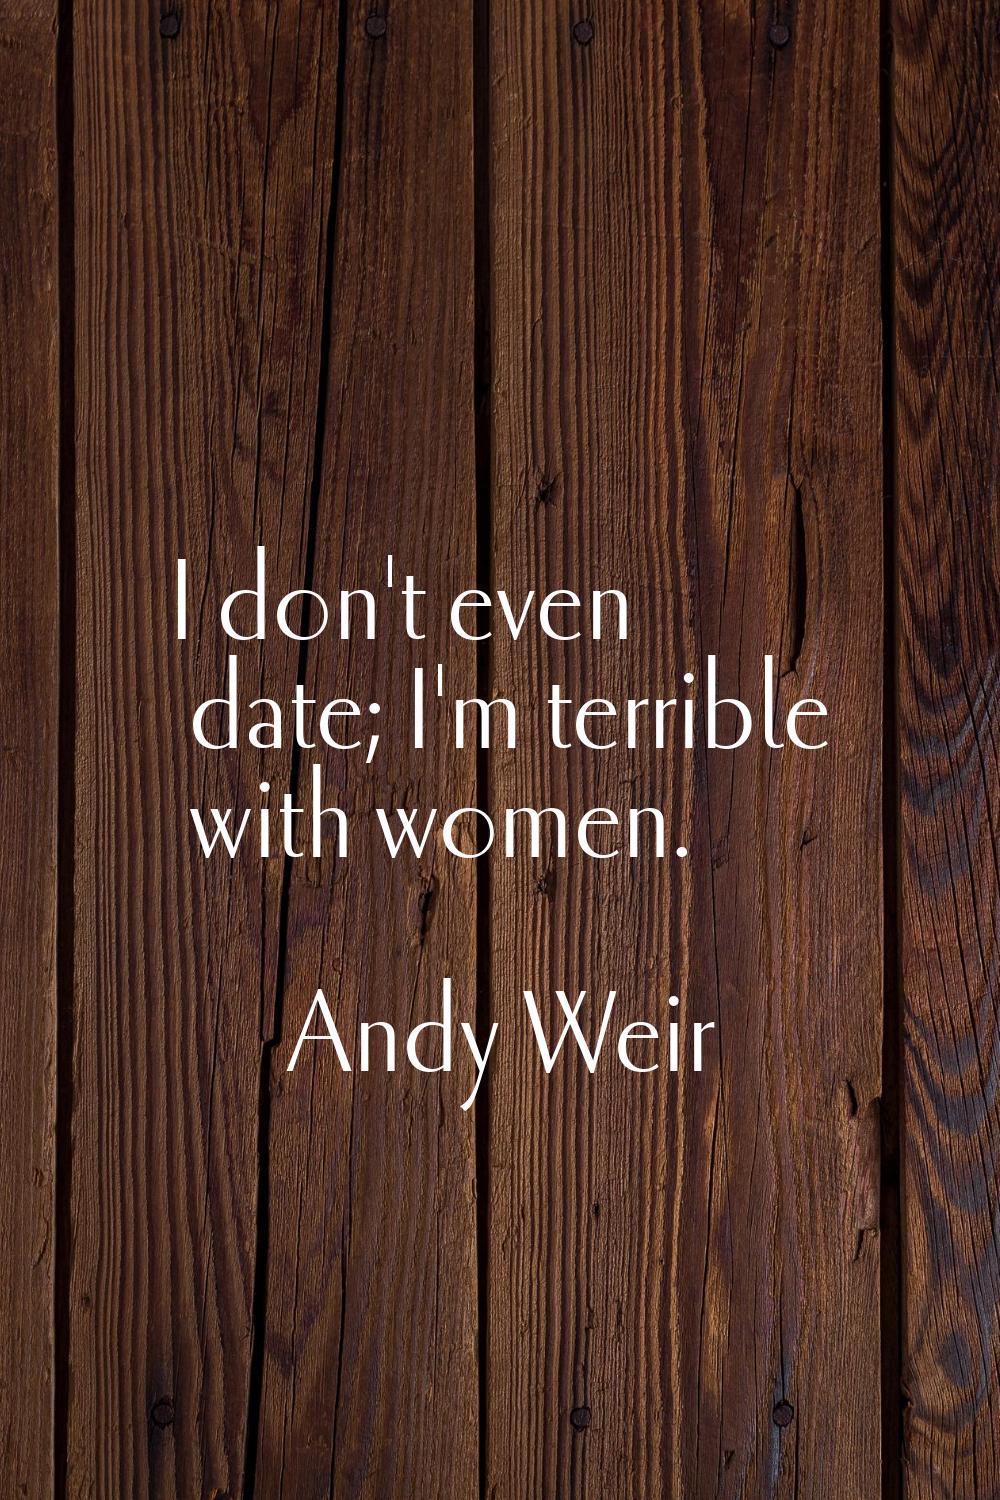 I don't even date; I'm terrible with women.